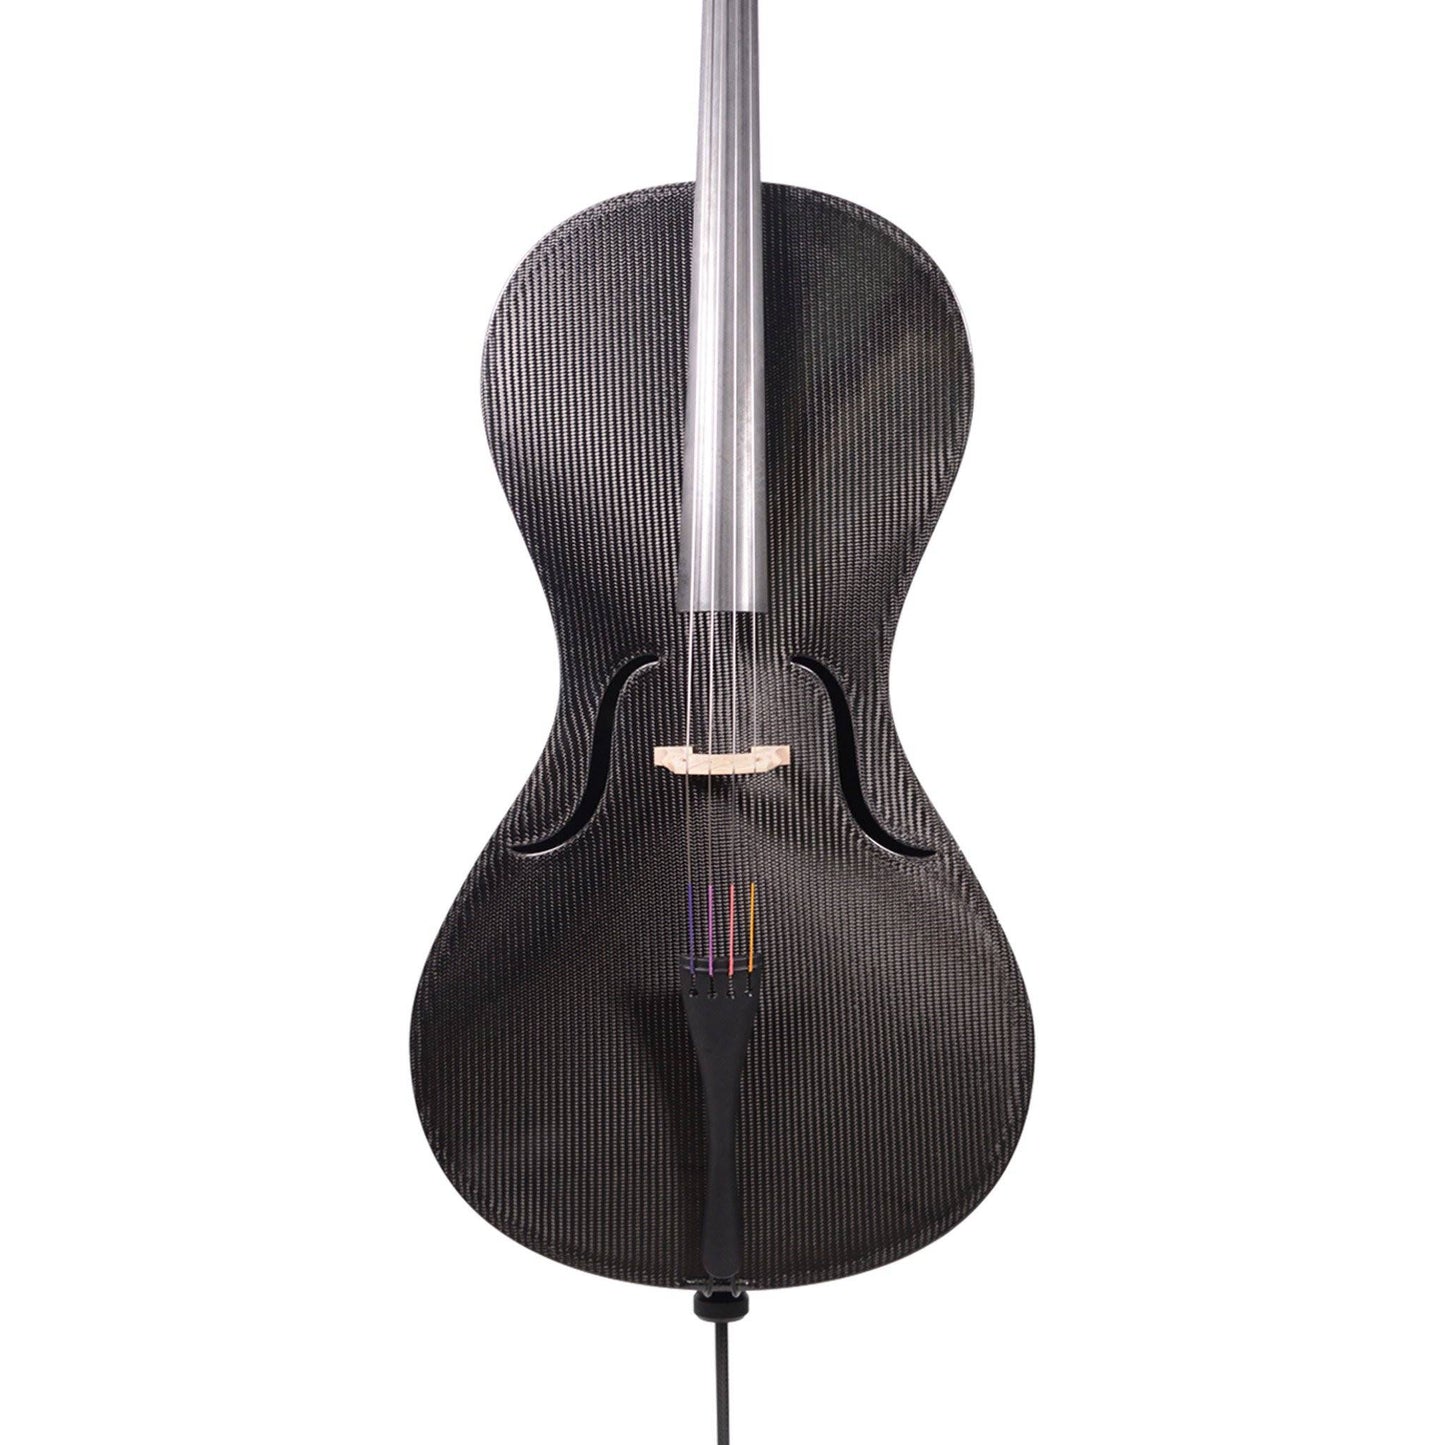 NEW! Carbon cello EvoLine made in Germany